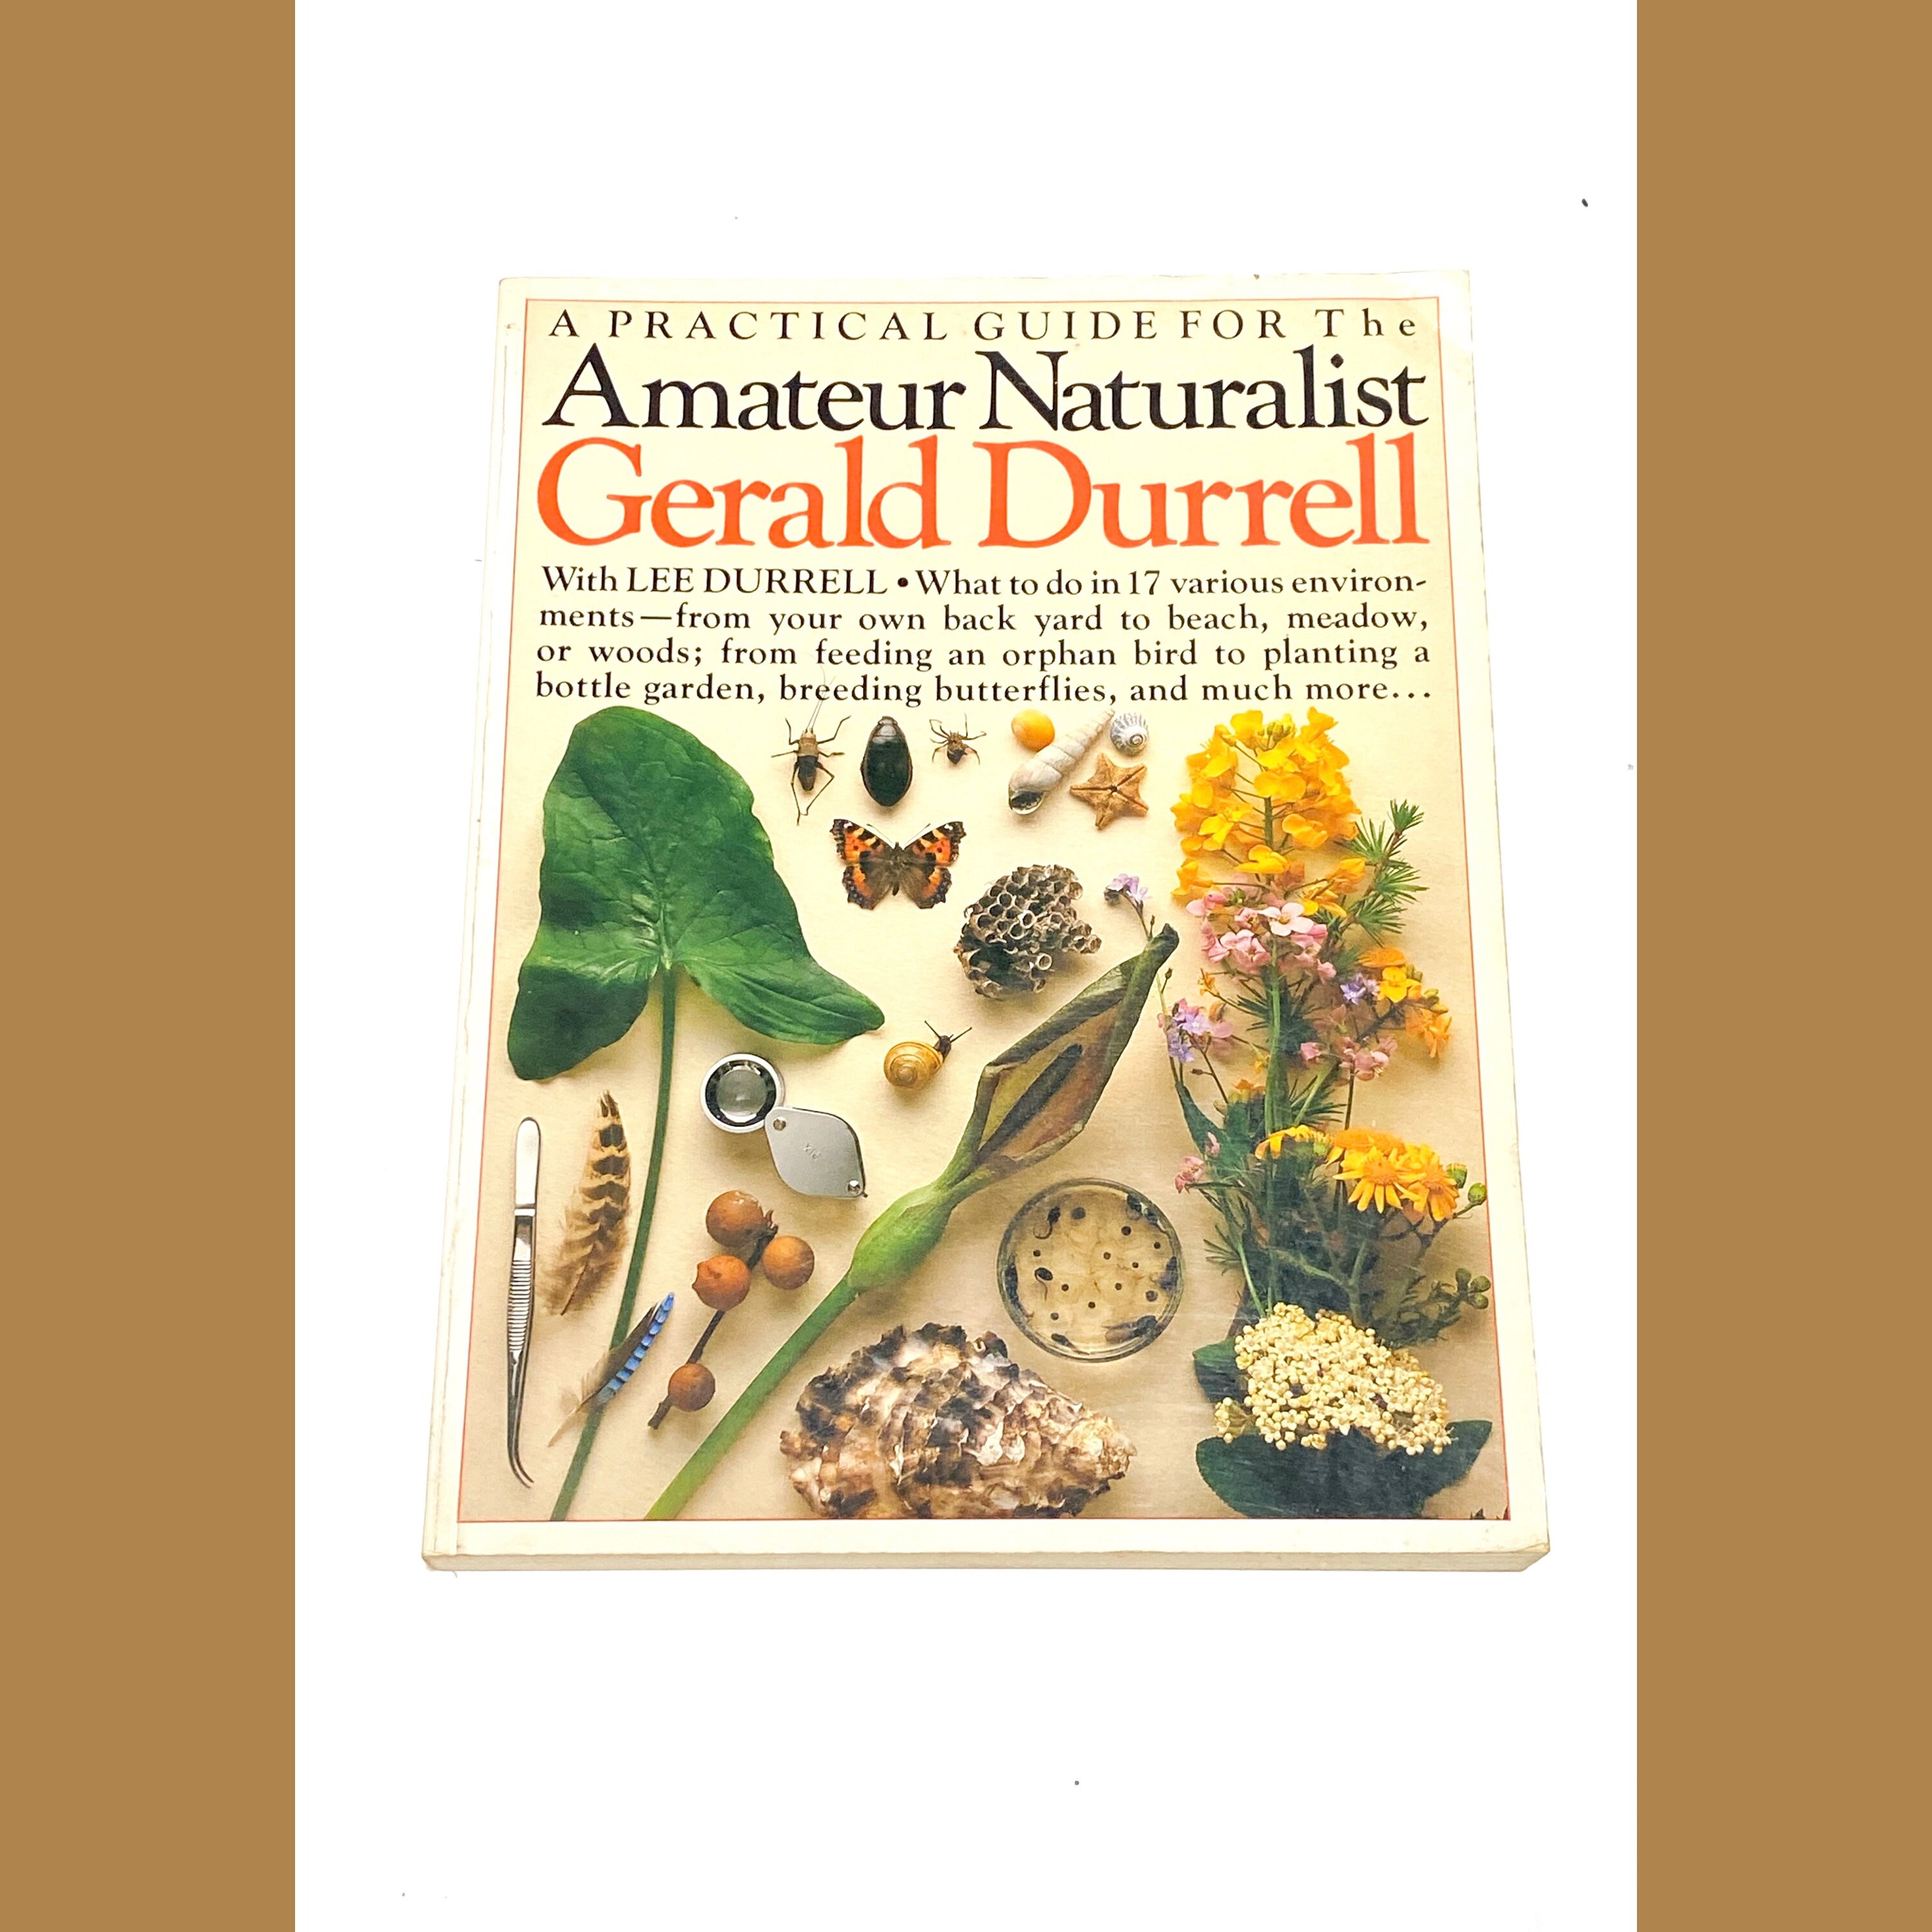 A Practical Guide for the Amateur Naturalist Gerald Durrell